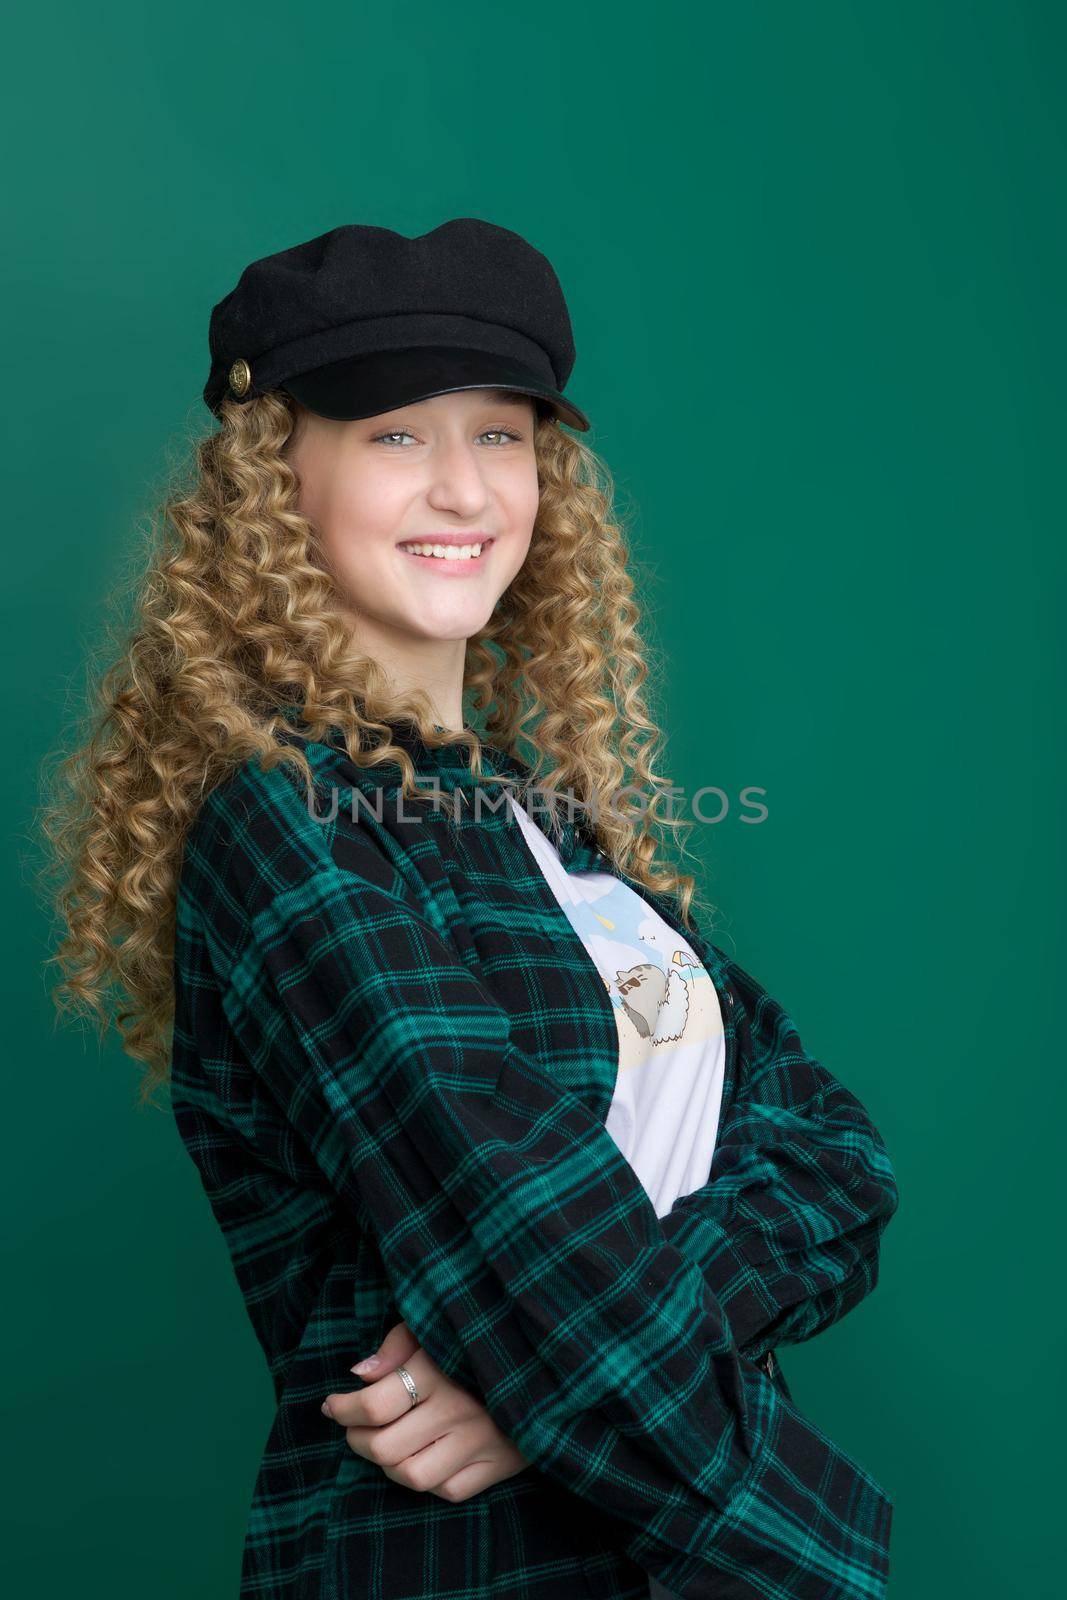 Portrait of happy beautiful girl in trendy outfit. Blonde girl with wavy hairstyle smiling at camera. Teenager wearing dark plaid cotton shirt and black cap posing on blue green background